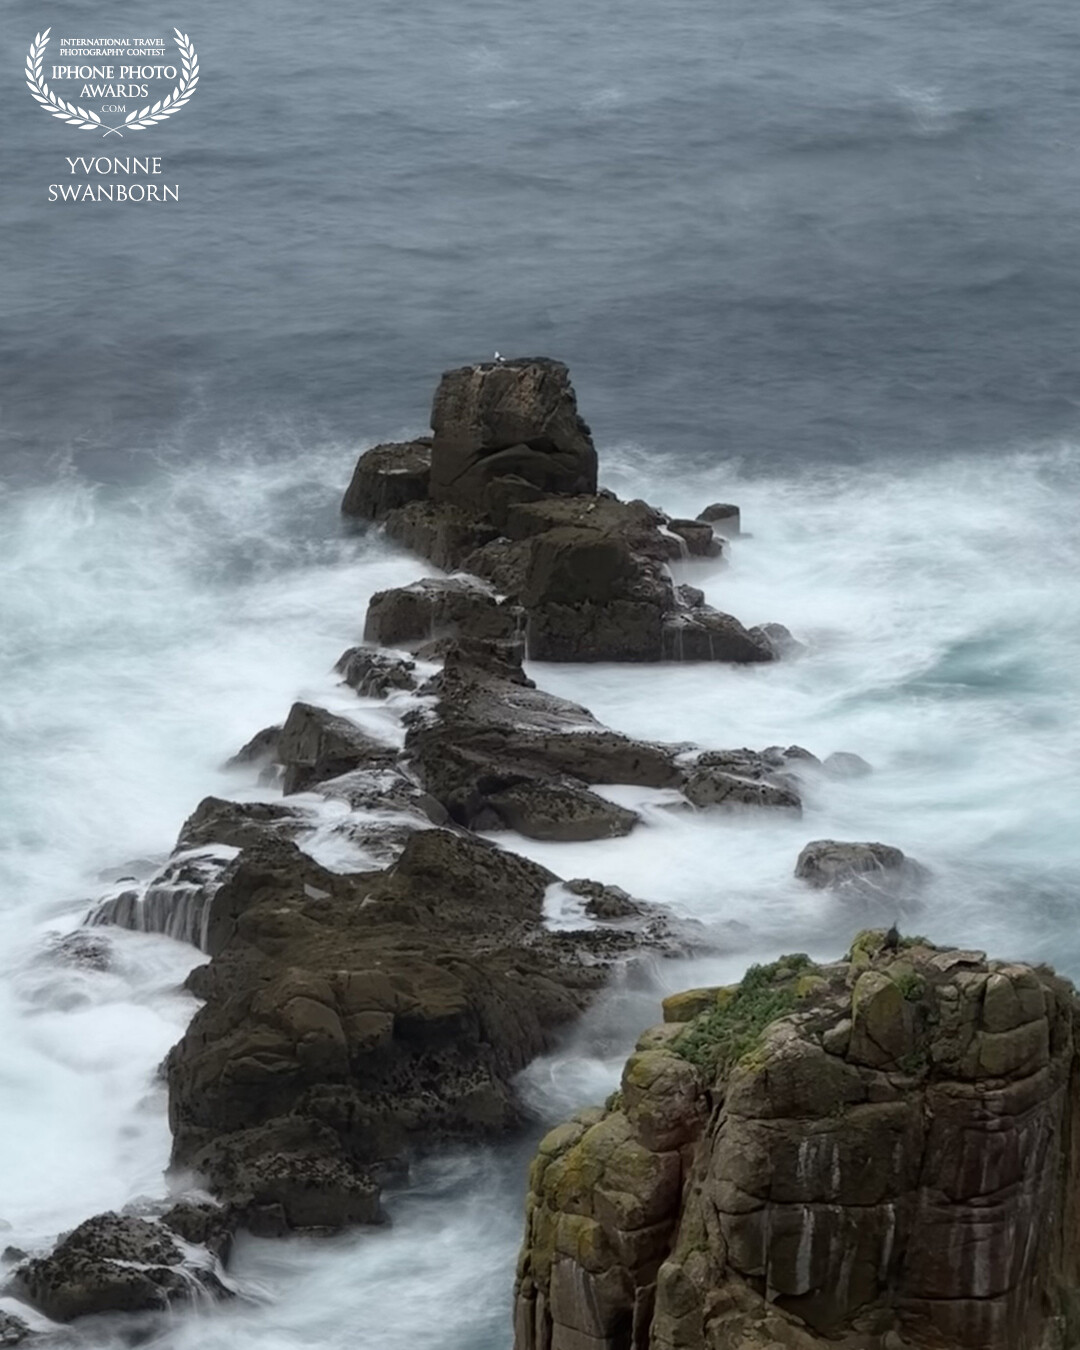 My husband and I travelled to south England this month. We visited Cornwall and Land's End, where I made this photo. The wheather was rainy and stormy, good for long exposure photos of the rough sea (I used my husband's iPhone 14 pro max).